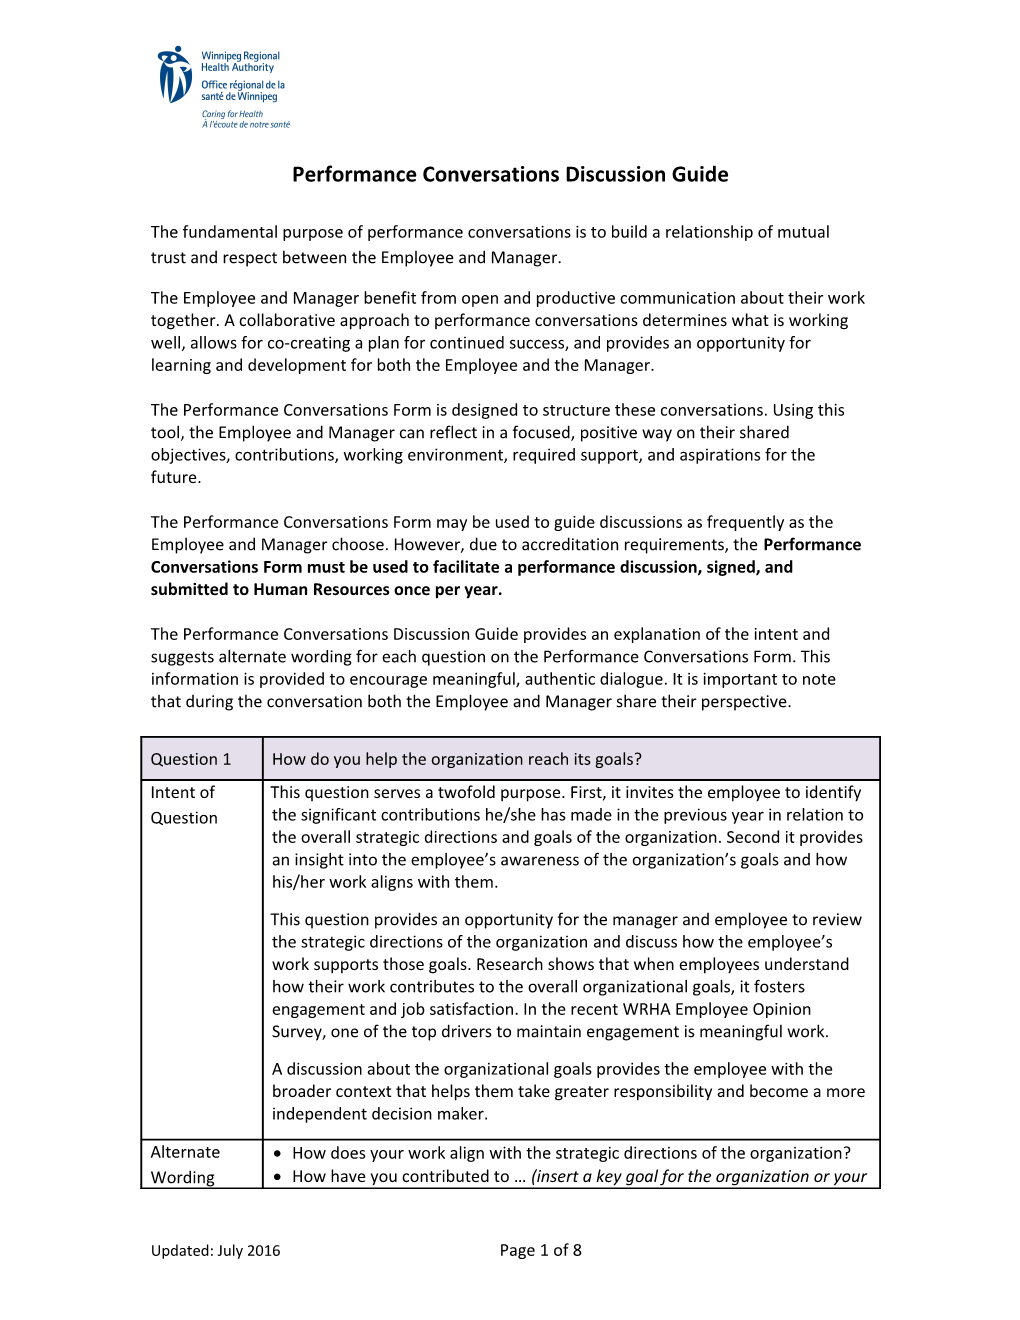 Performance Conversations Discussion Guide